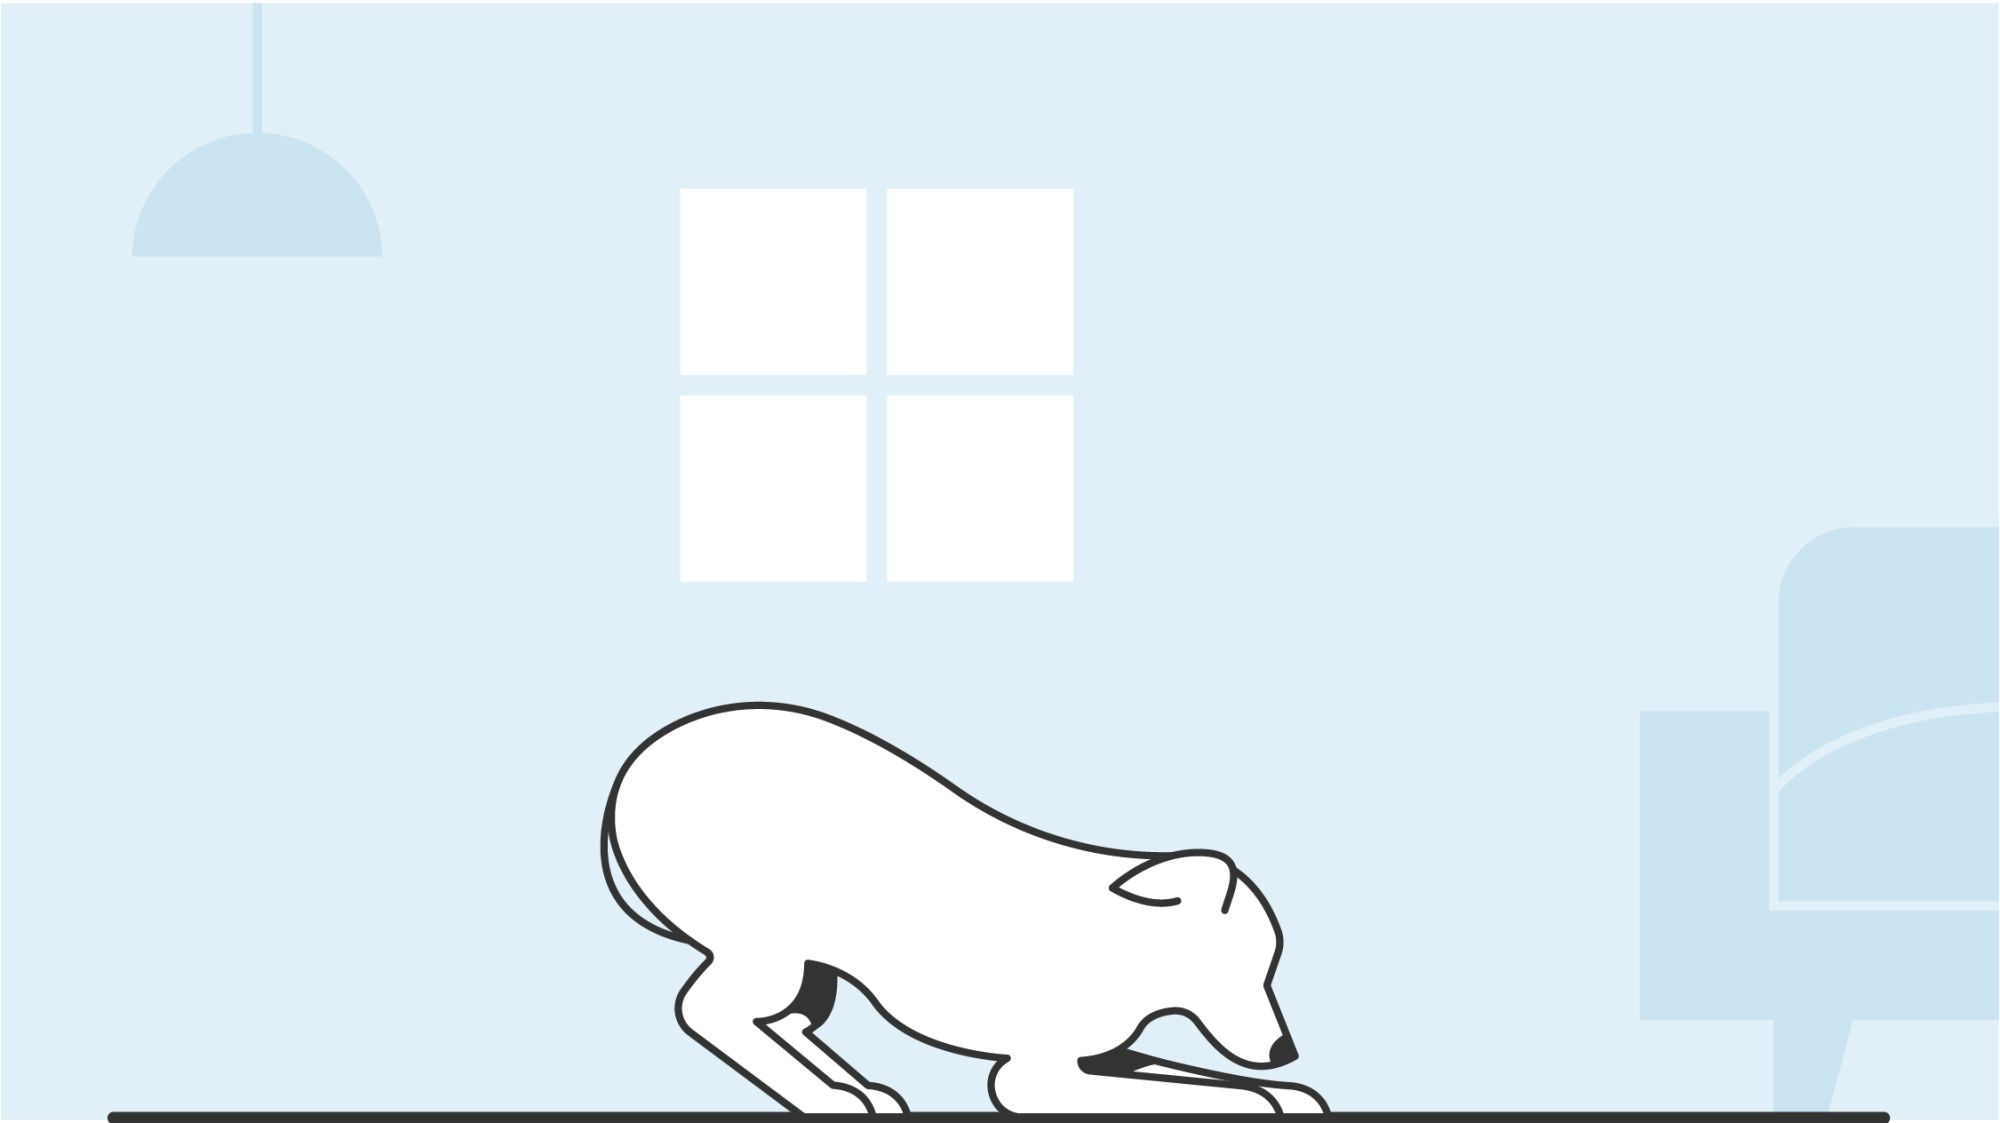 Illustration of a dog in a crouching position